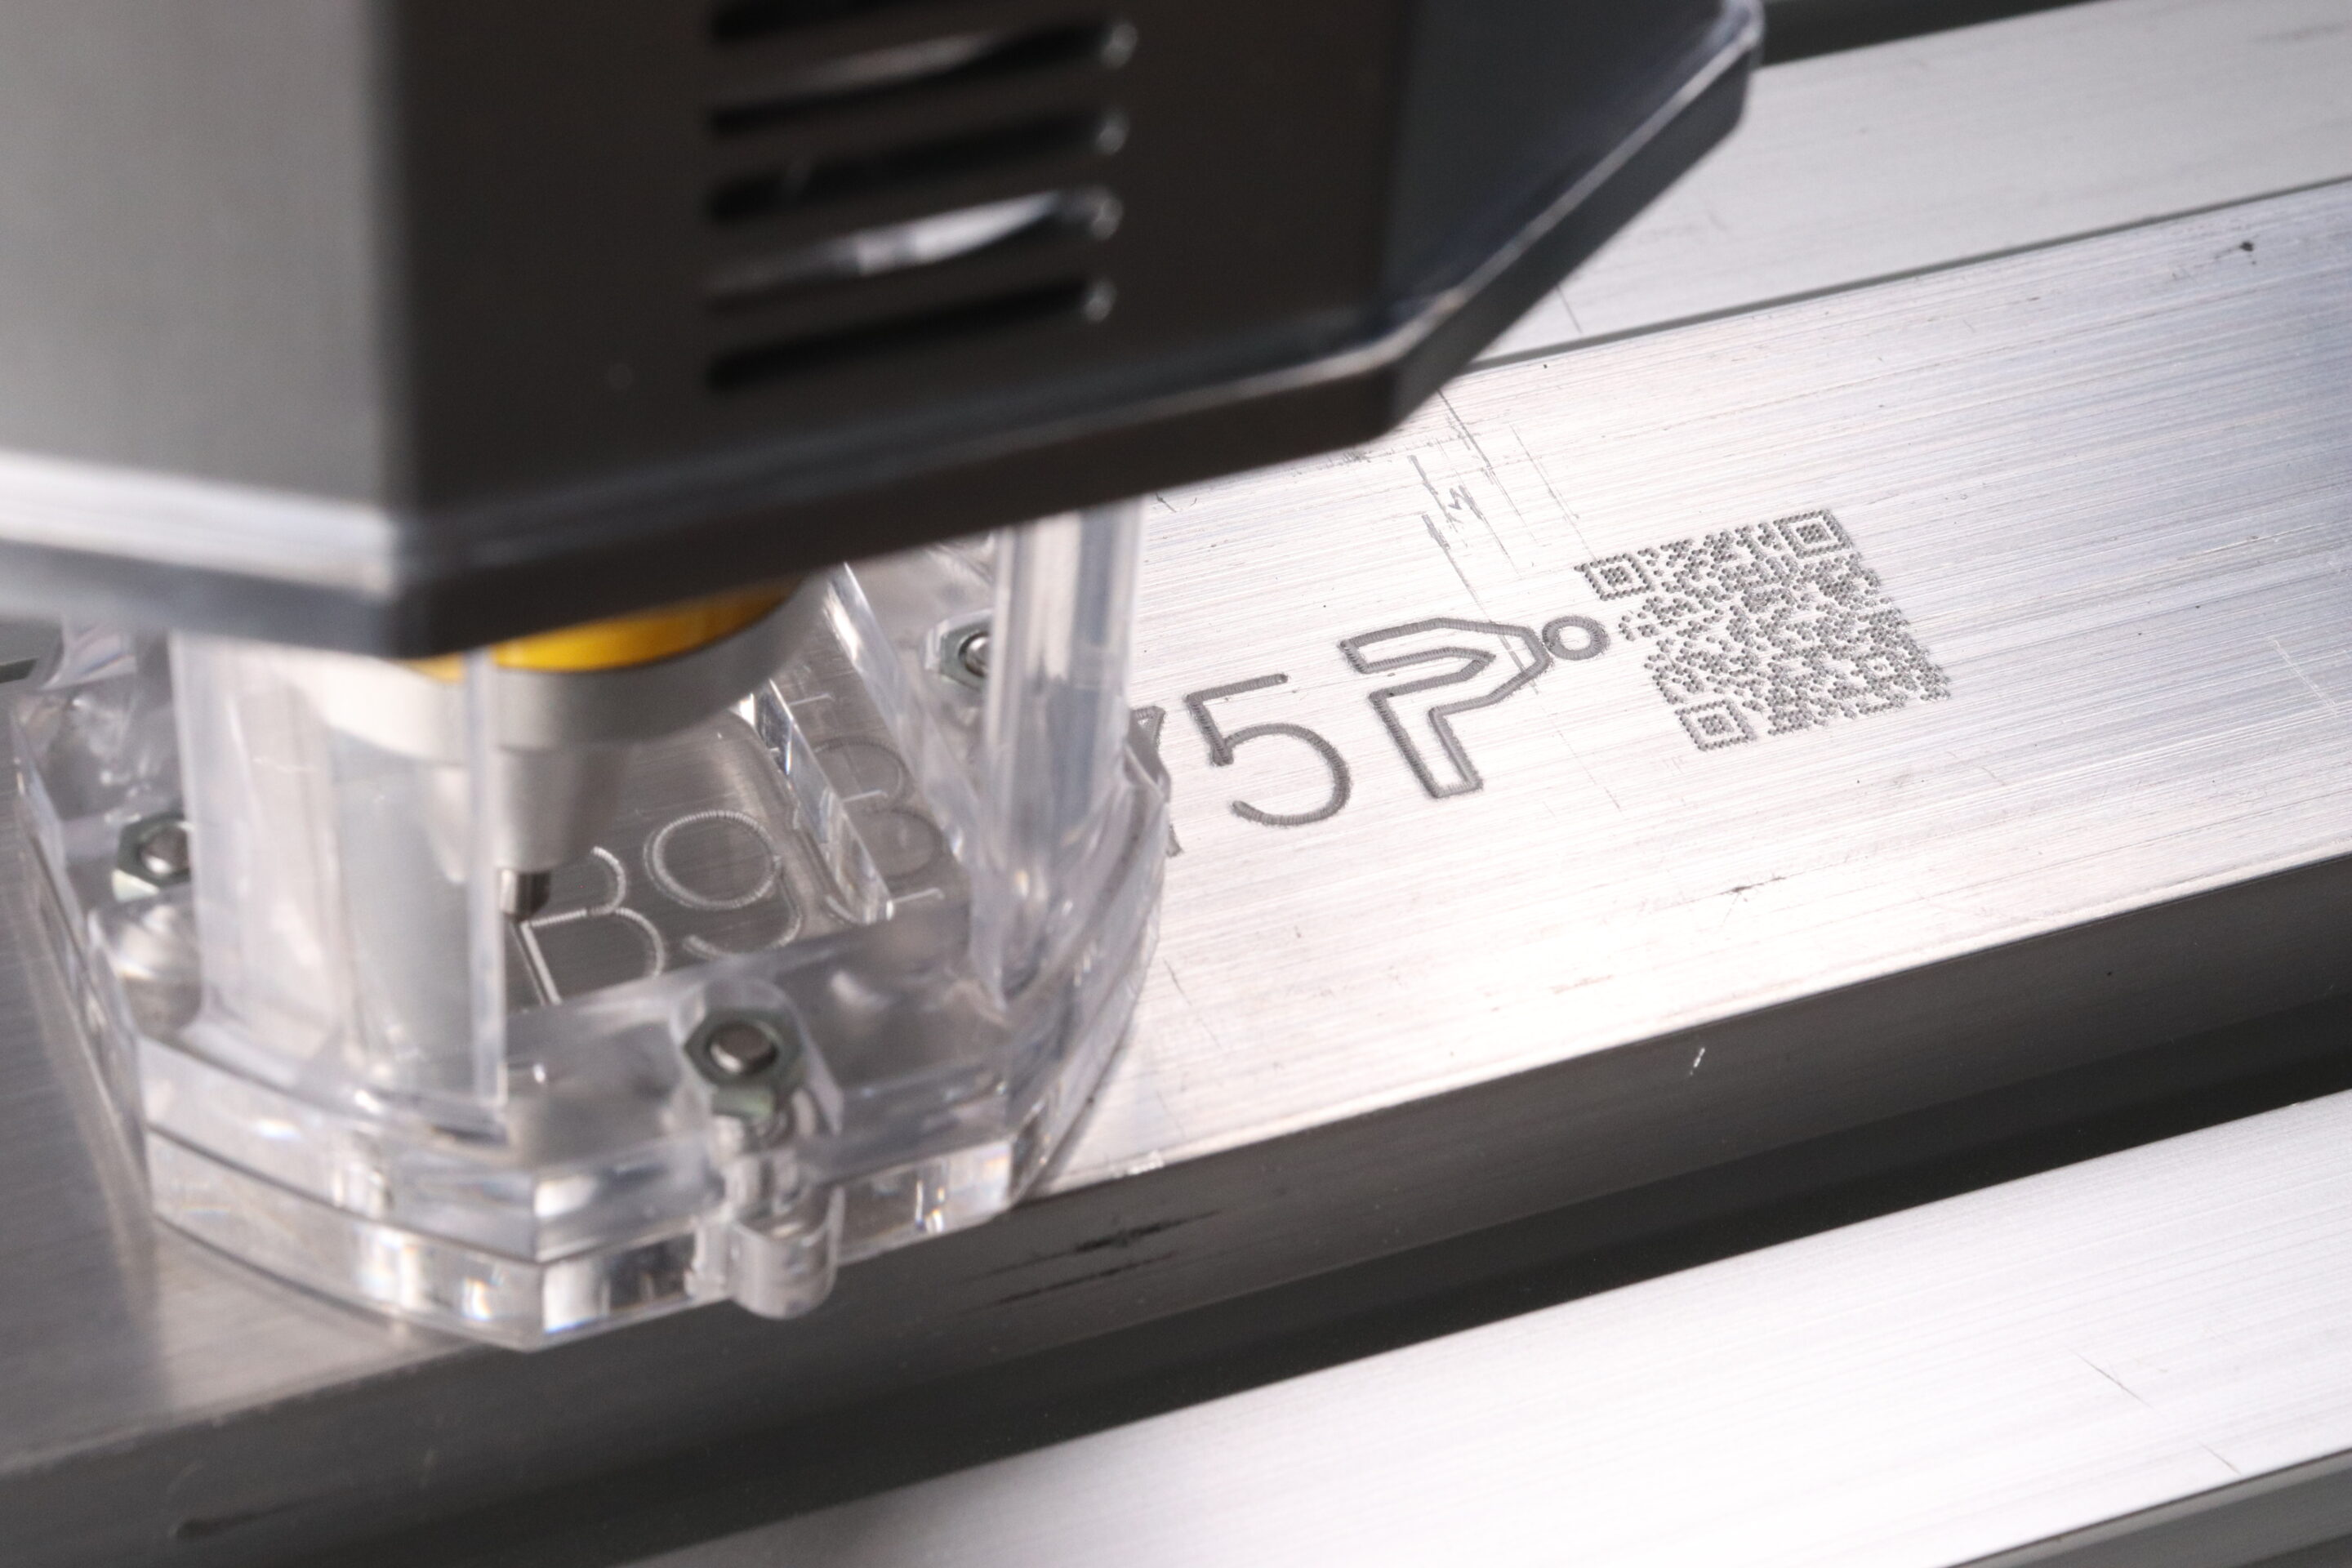 Tocho Marking Patmark auto etching into metal